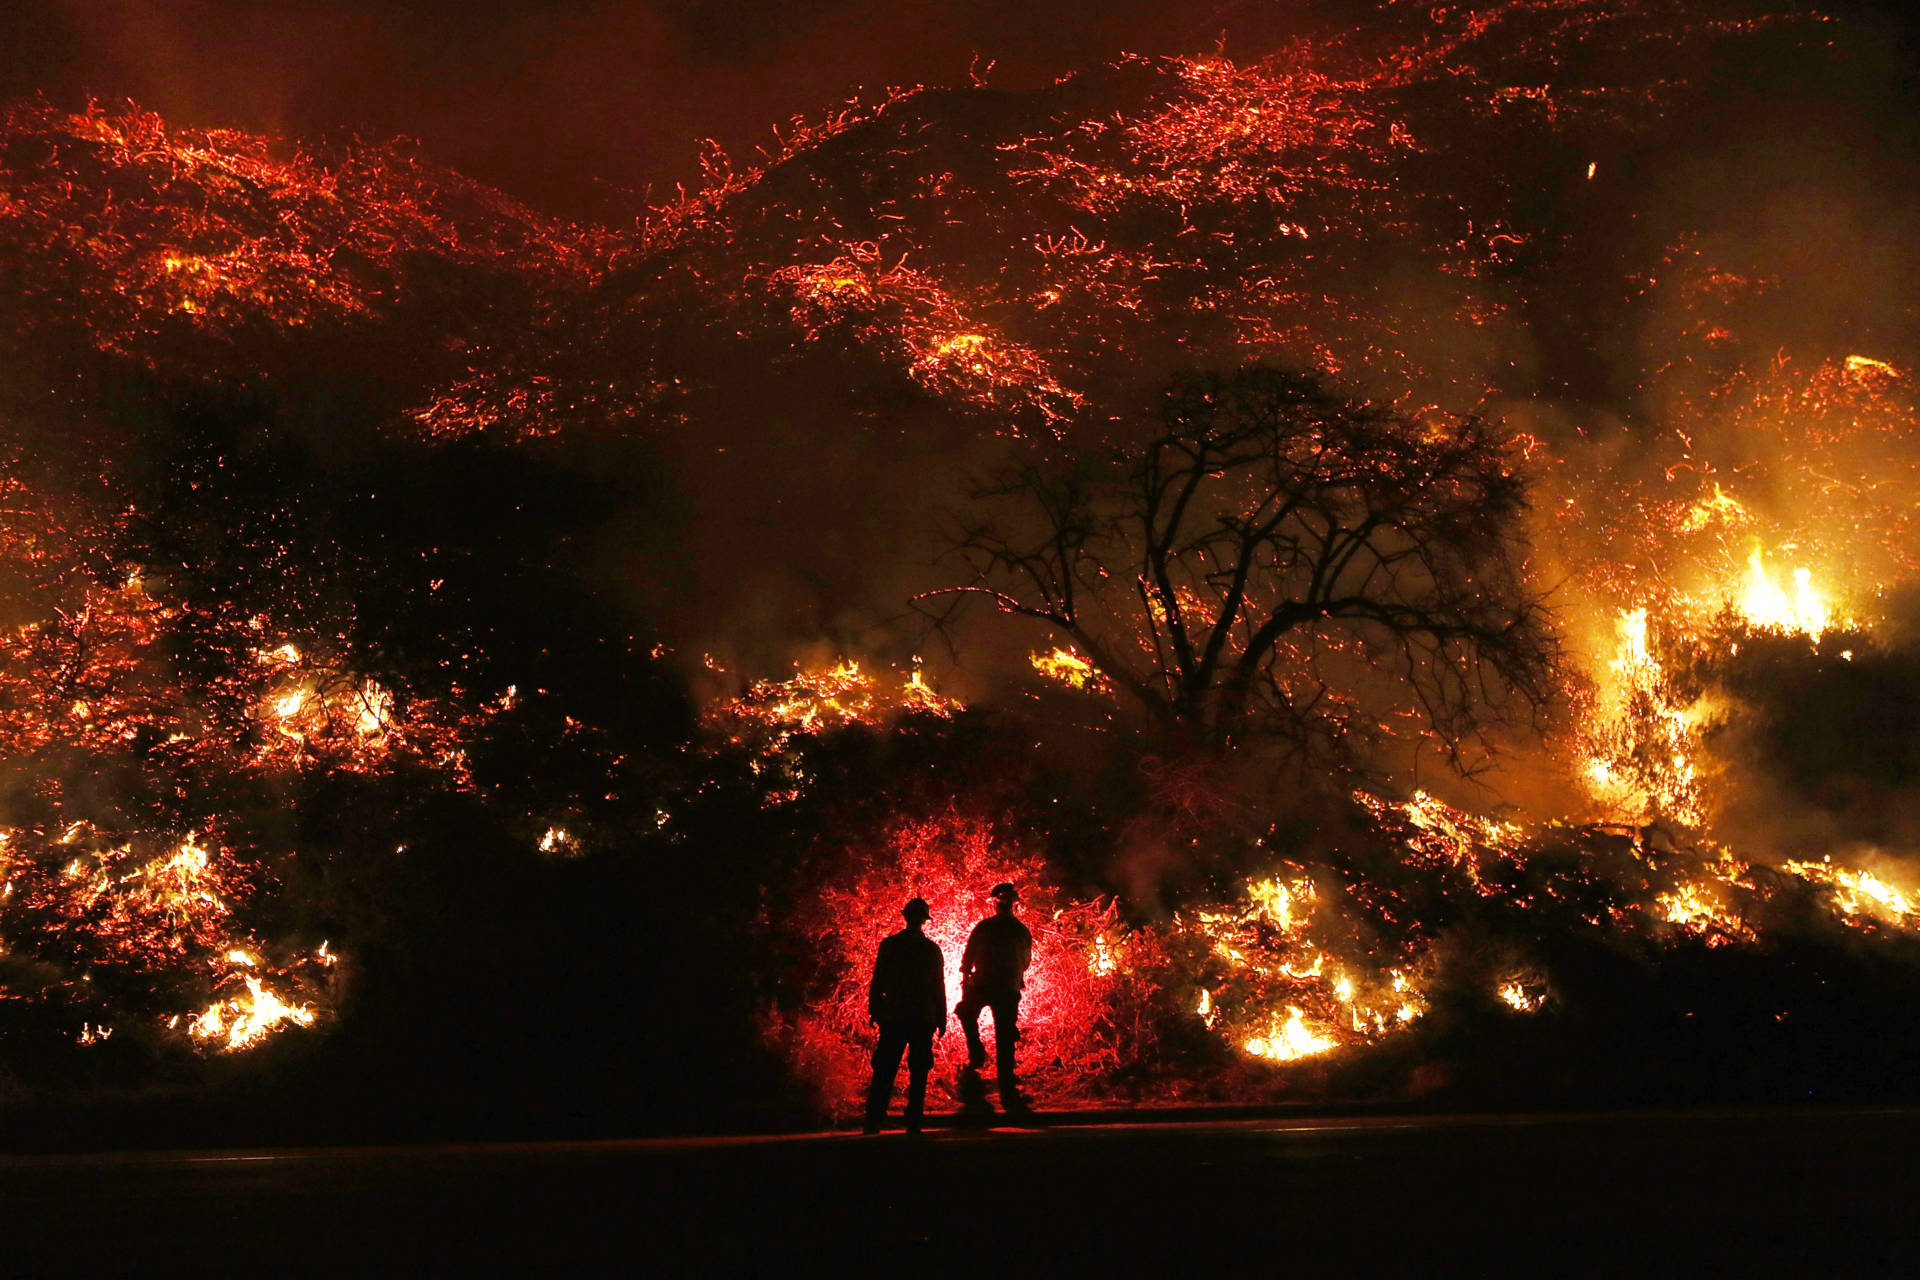 Firefighters monitor a section of the Thomas Fire along the 101 freeway on Dec. 7, 2017, north of Ventura. The firefighters occasionally used a flare device to burn off brush close to the roadside. Strong Santa Ana winds are rapidly pushing multiple wildfires across the region, expanding across tens of thousands of acres and destroying hundreds of homes and structures.  Mario Tama/Getty Images